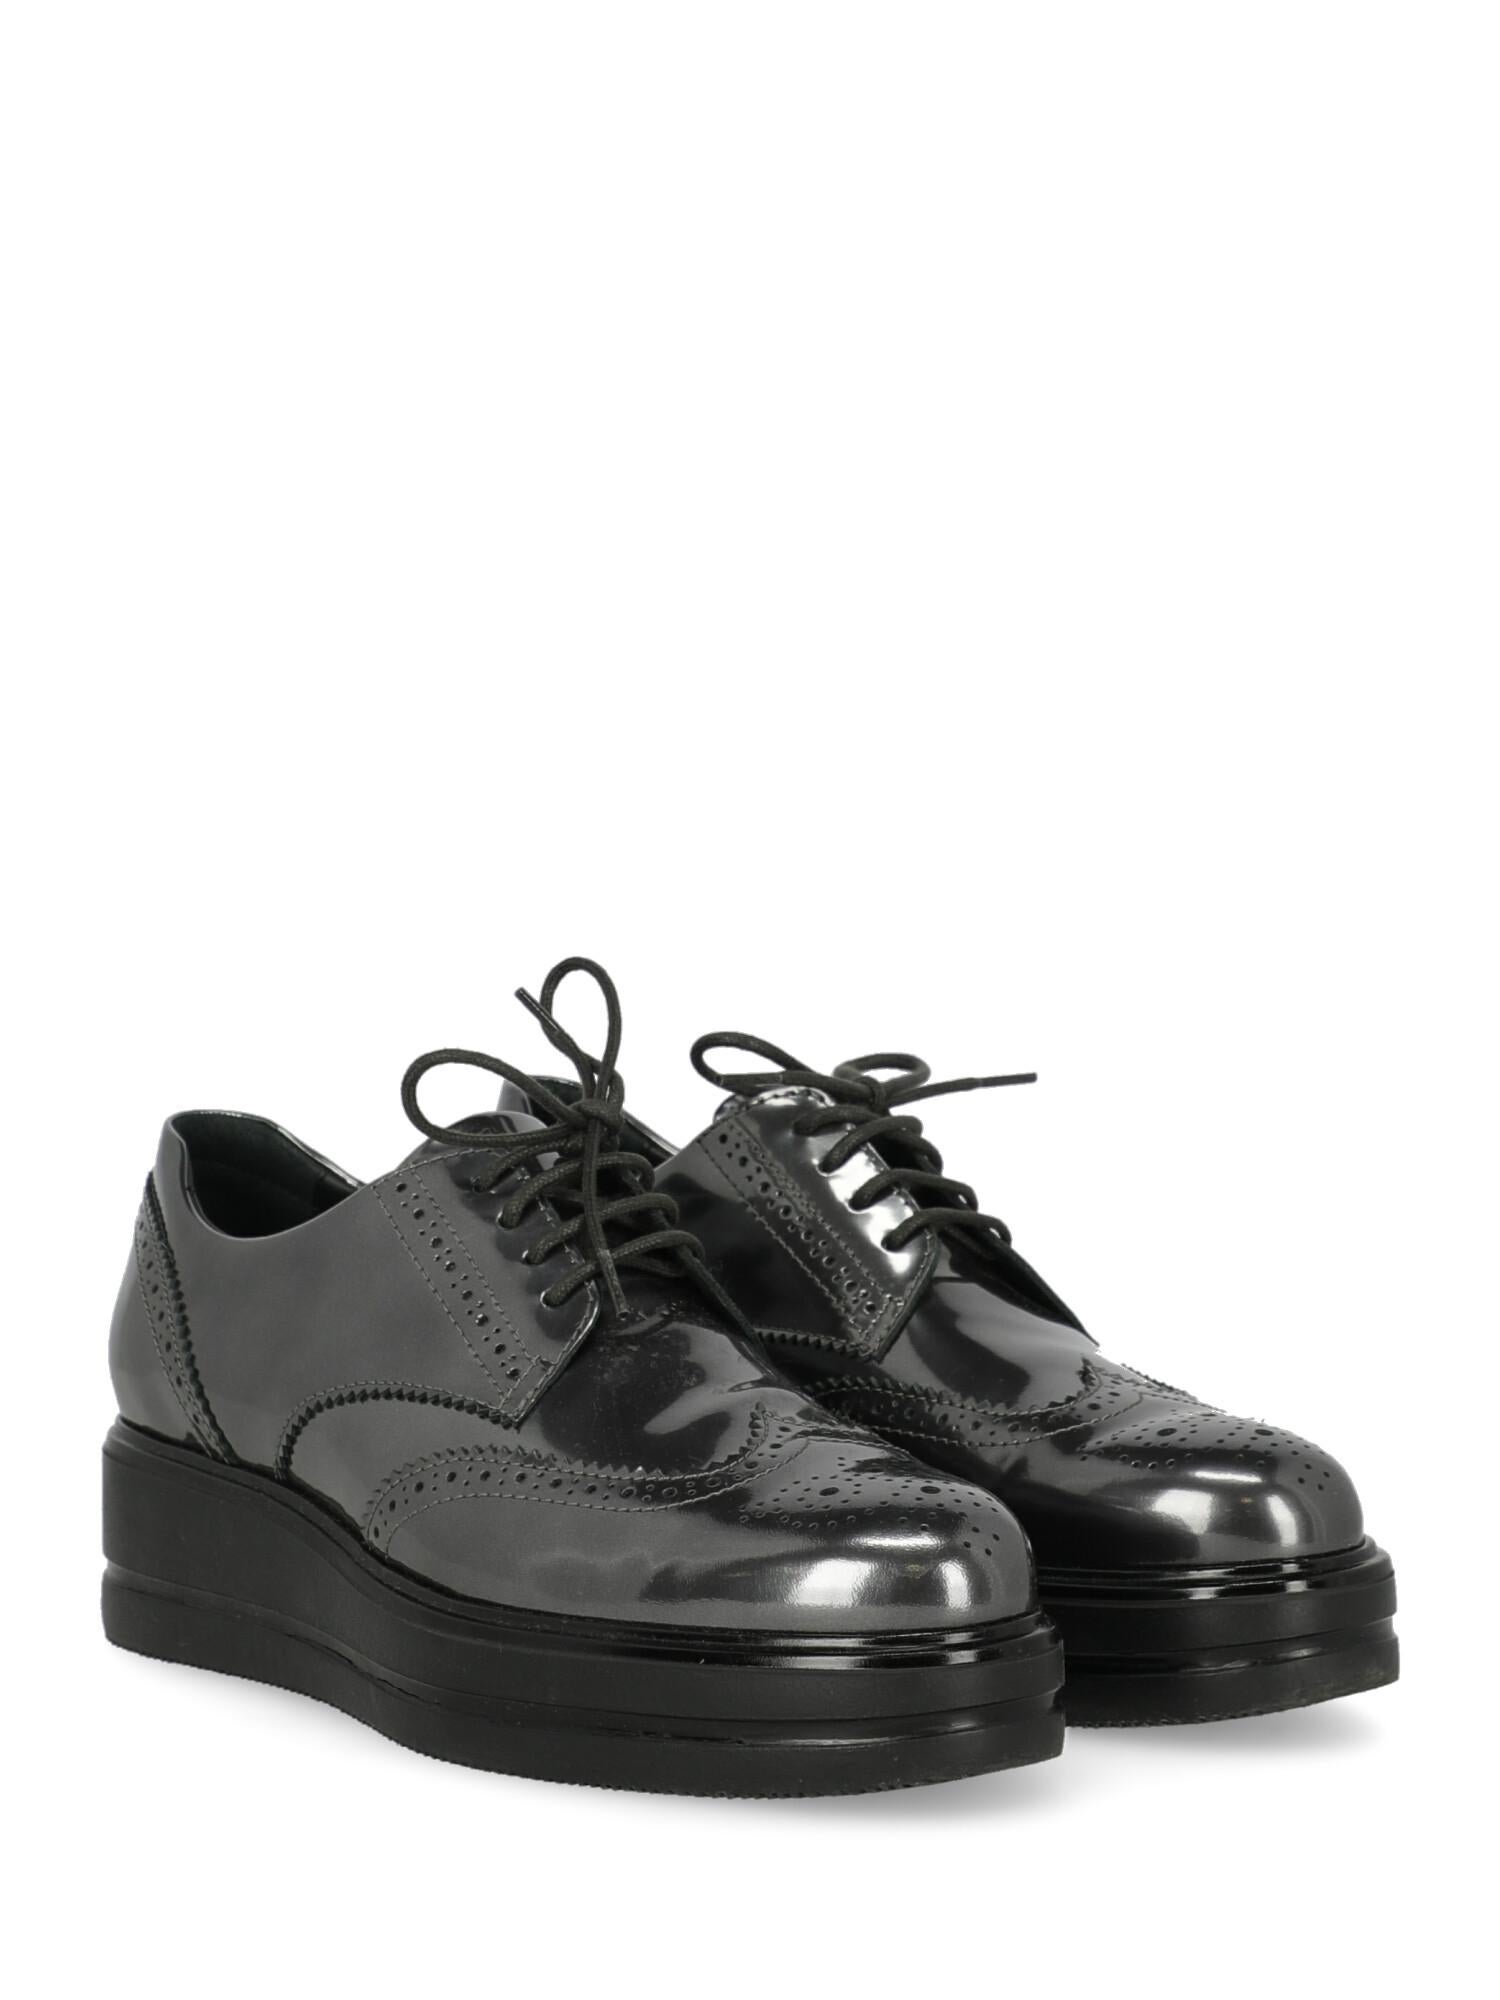 Shoe, leather, solid color, oxford, back logo, lace-up, leather insole.

Includes:
- Dust bag
- Box

Product Condition: Very Good
Sole: negligible signs of use. Upper: negligible stains, negligible wrinkle.

Composition:
Upper: 100% Leather
Sole: